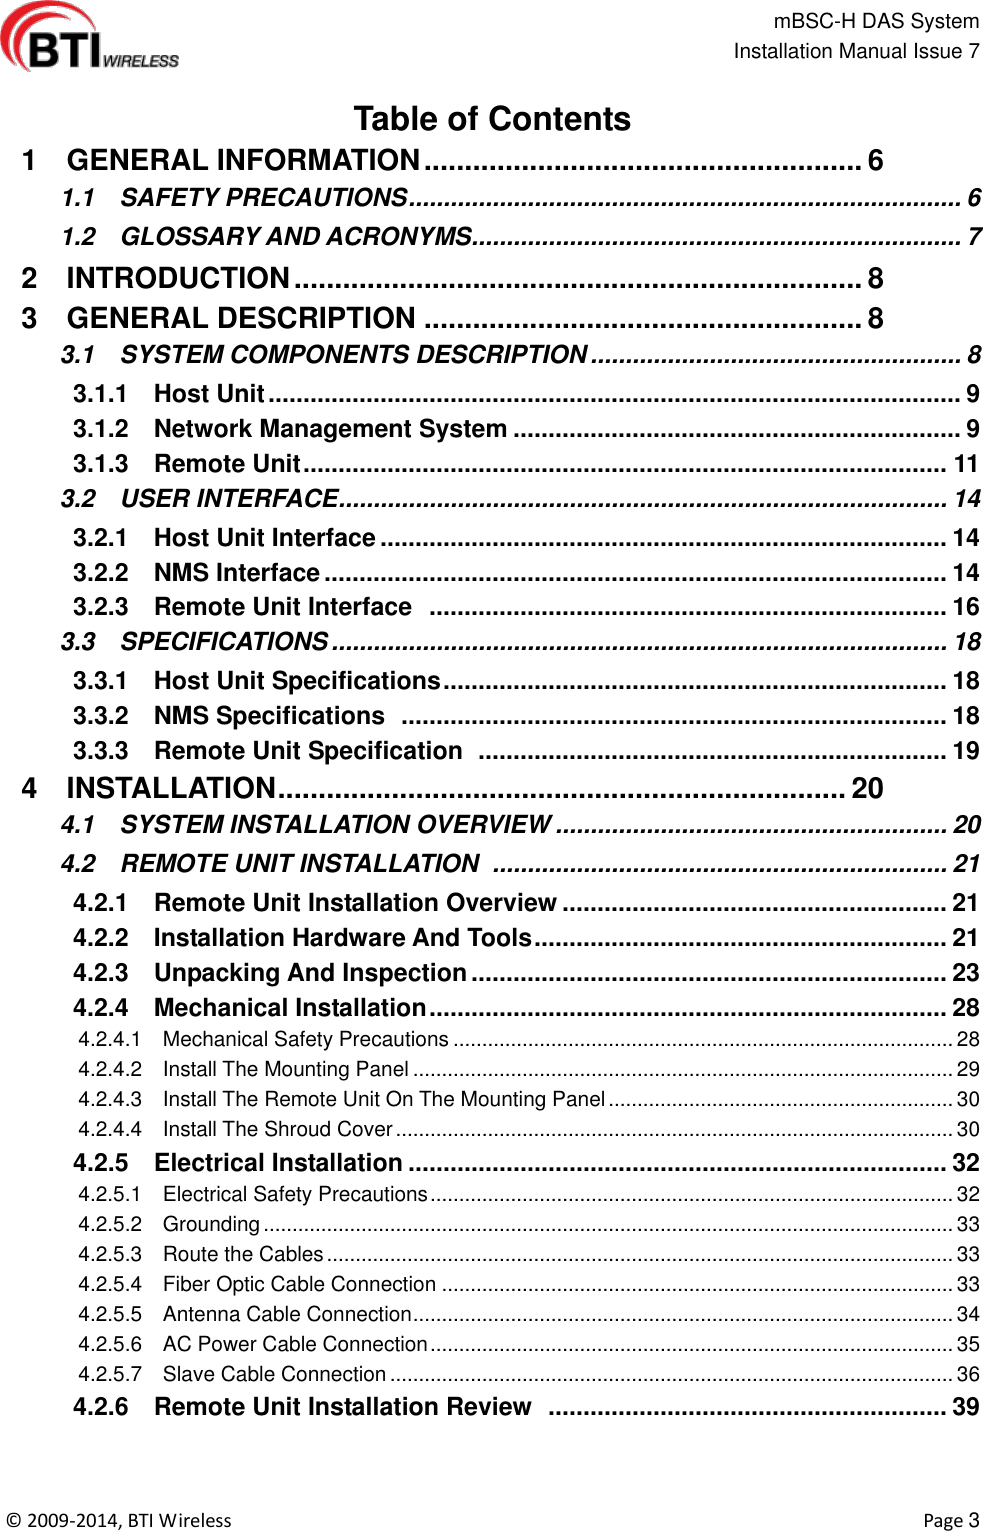                                                   mBSC-H DAS System   Installation Manual Issue 7  ©  2009-2014, BTI Wireless    Page 3  Table of Contents  1    GENERAL INFORMATION ...................................................... 6   1.1    SAFETY PRECAUTIONS ............................................................................... 6   1.2    GLOSSARY AND ACRONYMS ...................................................................... 7   2    INTRODUCTION ...................................................................... 8   3    GENERAL DESCRIPTION ...................................................... 8   3.1    SYSTEM COMPONENTS DESCRIPTION ..................................................... 8   3.1.1    Host Unit ................................................................................................... 9   3.1.2    Network Management System ................................................................ 9   3.1.3    Remote Unit ............................................................................................ 11   3.2    USER INTERFACE ....................................................................................... 14   3.2.1    Host Unit Interface ................................................................................. 14   3.2.2    NMS Interface ......................................................................................... 14   3.2.3    Remote Unit Interface   .......................................................................... 16   3.3    SPECIFICATIONS ........................................................................................ 18   3.3.1    Host Unit Specifications ........................................................................ 18   3.3.2    NMS Specifications   .............................................................................. 18   3.3.3    Remote Unit Specification   ................................................................... 19   4    INSTALLATION ...................................................................... 20   4.1    SYSTEM INSTALLATION OVERVIEW ........................................................ 20   4.2    REMOTE UNIT INSTALLATION   ................................................................. 21   4.2.1    Remote Unit Installation Overview ....................................................... 21   4.2.2    Installation Hardware And Tools ........................................................... 21   4.2.3    Unpacking And Inspection .................................................................... 23   4.2.4    Mechanical Installation .......................................................................... 28   4.2.4.1    Mechanical Safety Precautions ....................................................................................... 28   4.2.4.2    Install The Mounting Panel .............................................................................................. 29   4.2.4.3    Install The Remote Unit On The Mounting Panel ............................................................ 30   4.2.4.4    Install The Shroud Cover ................................................................................................. 30   4.2.5    Electrical Installation ............................................................................. 32   4.2.5.1    Electrical Safety Precautions ........................................................................................... 32   4.2.5.2    Grounding ........................................................................................................................ 33   4.2.5.3    Route the Cables ............................................................................................................. 33   4.2.5.4    Fiber Optic Cable Connection ......................................................................................... 33   4.2.5.5    Antenna Cable Connection .............................................................................................. 34   4.2.5.6    AC Power Cable Connection ........................................................................................... 35   4.2.5.7    Slave Cable Connection .................................................................................................. 36   4.2.6    Remote Unit Installation Review   ......................................................... 39 